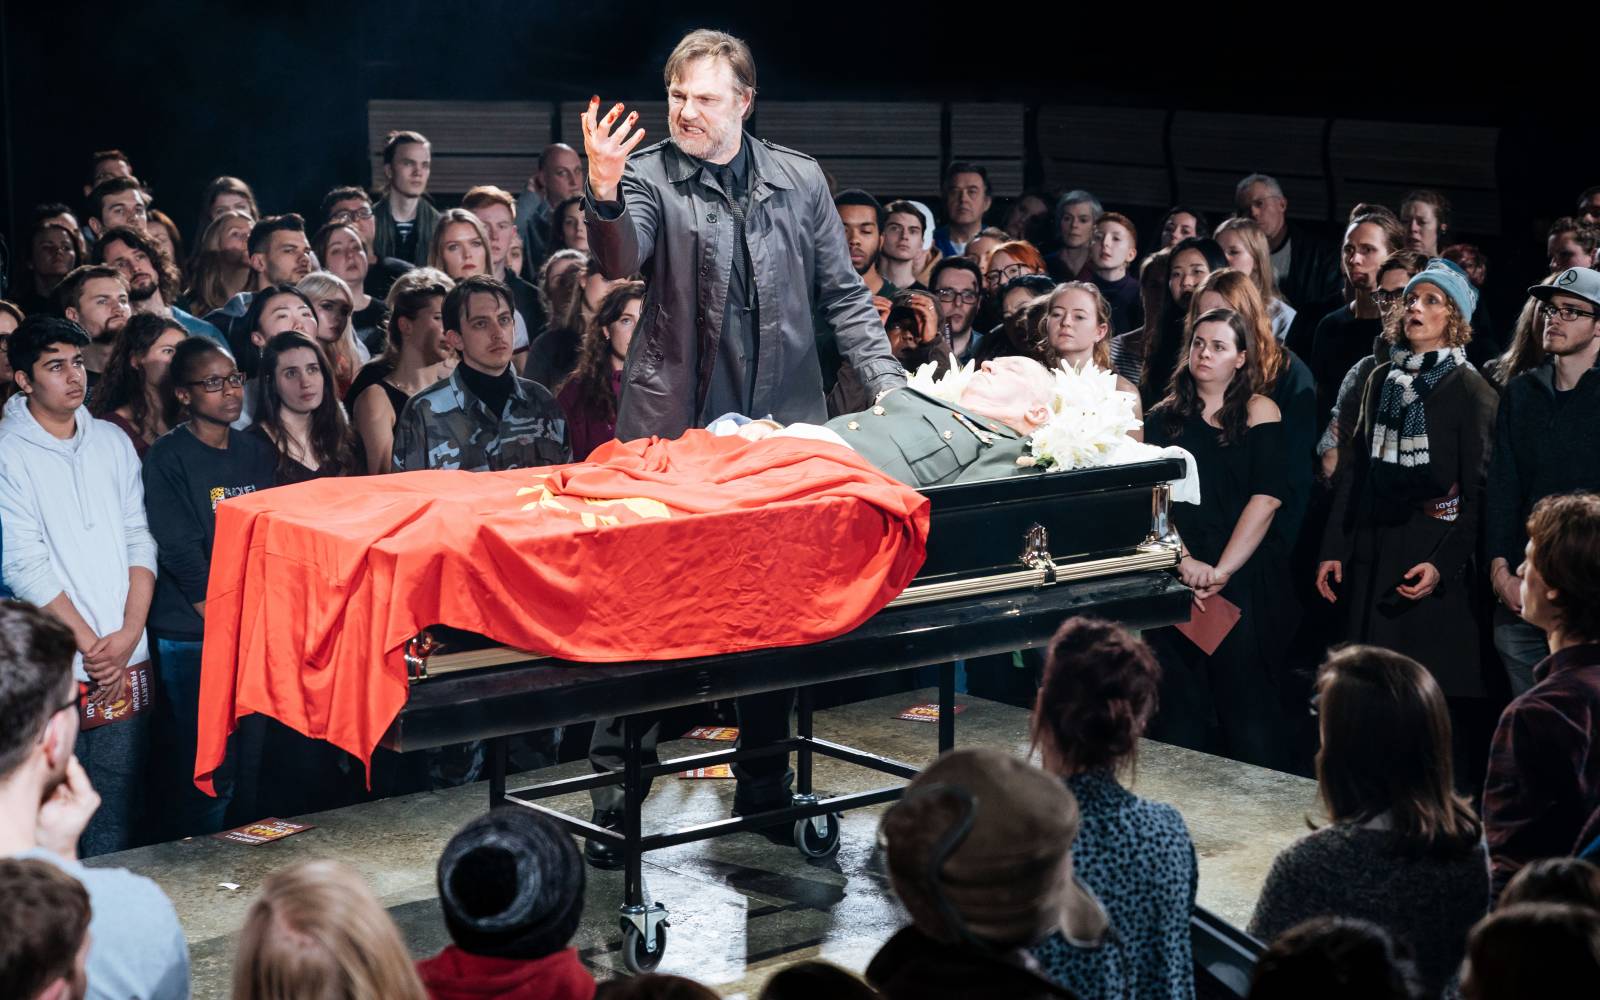 A man stares at his hand with fury. He stands over a body in a coffin, draped in a red flag, surrounded by a crowd